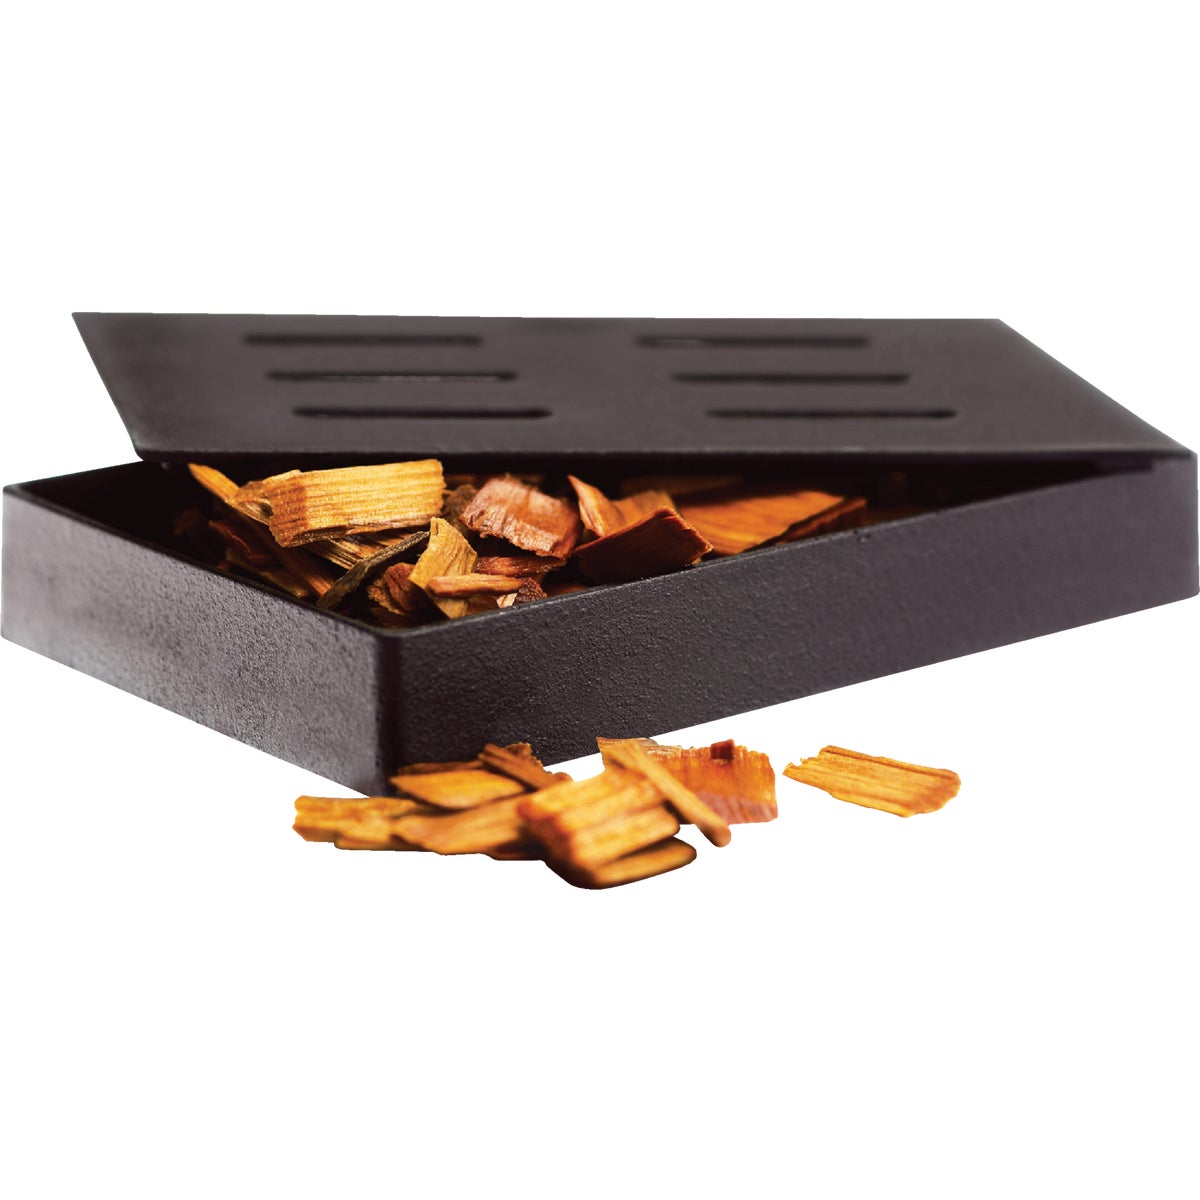 Item 838969, Add real smoke flavor by adding smoking chips to the 4" x 5" cast-iron box